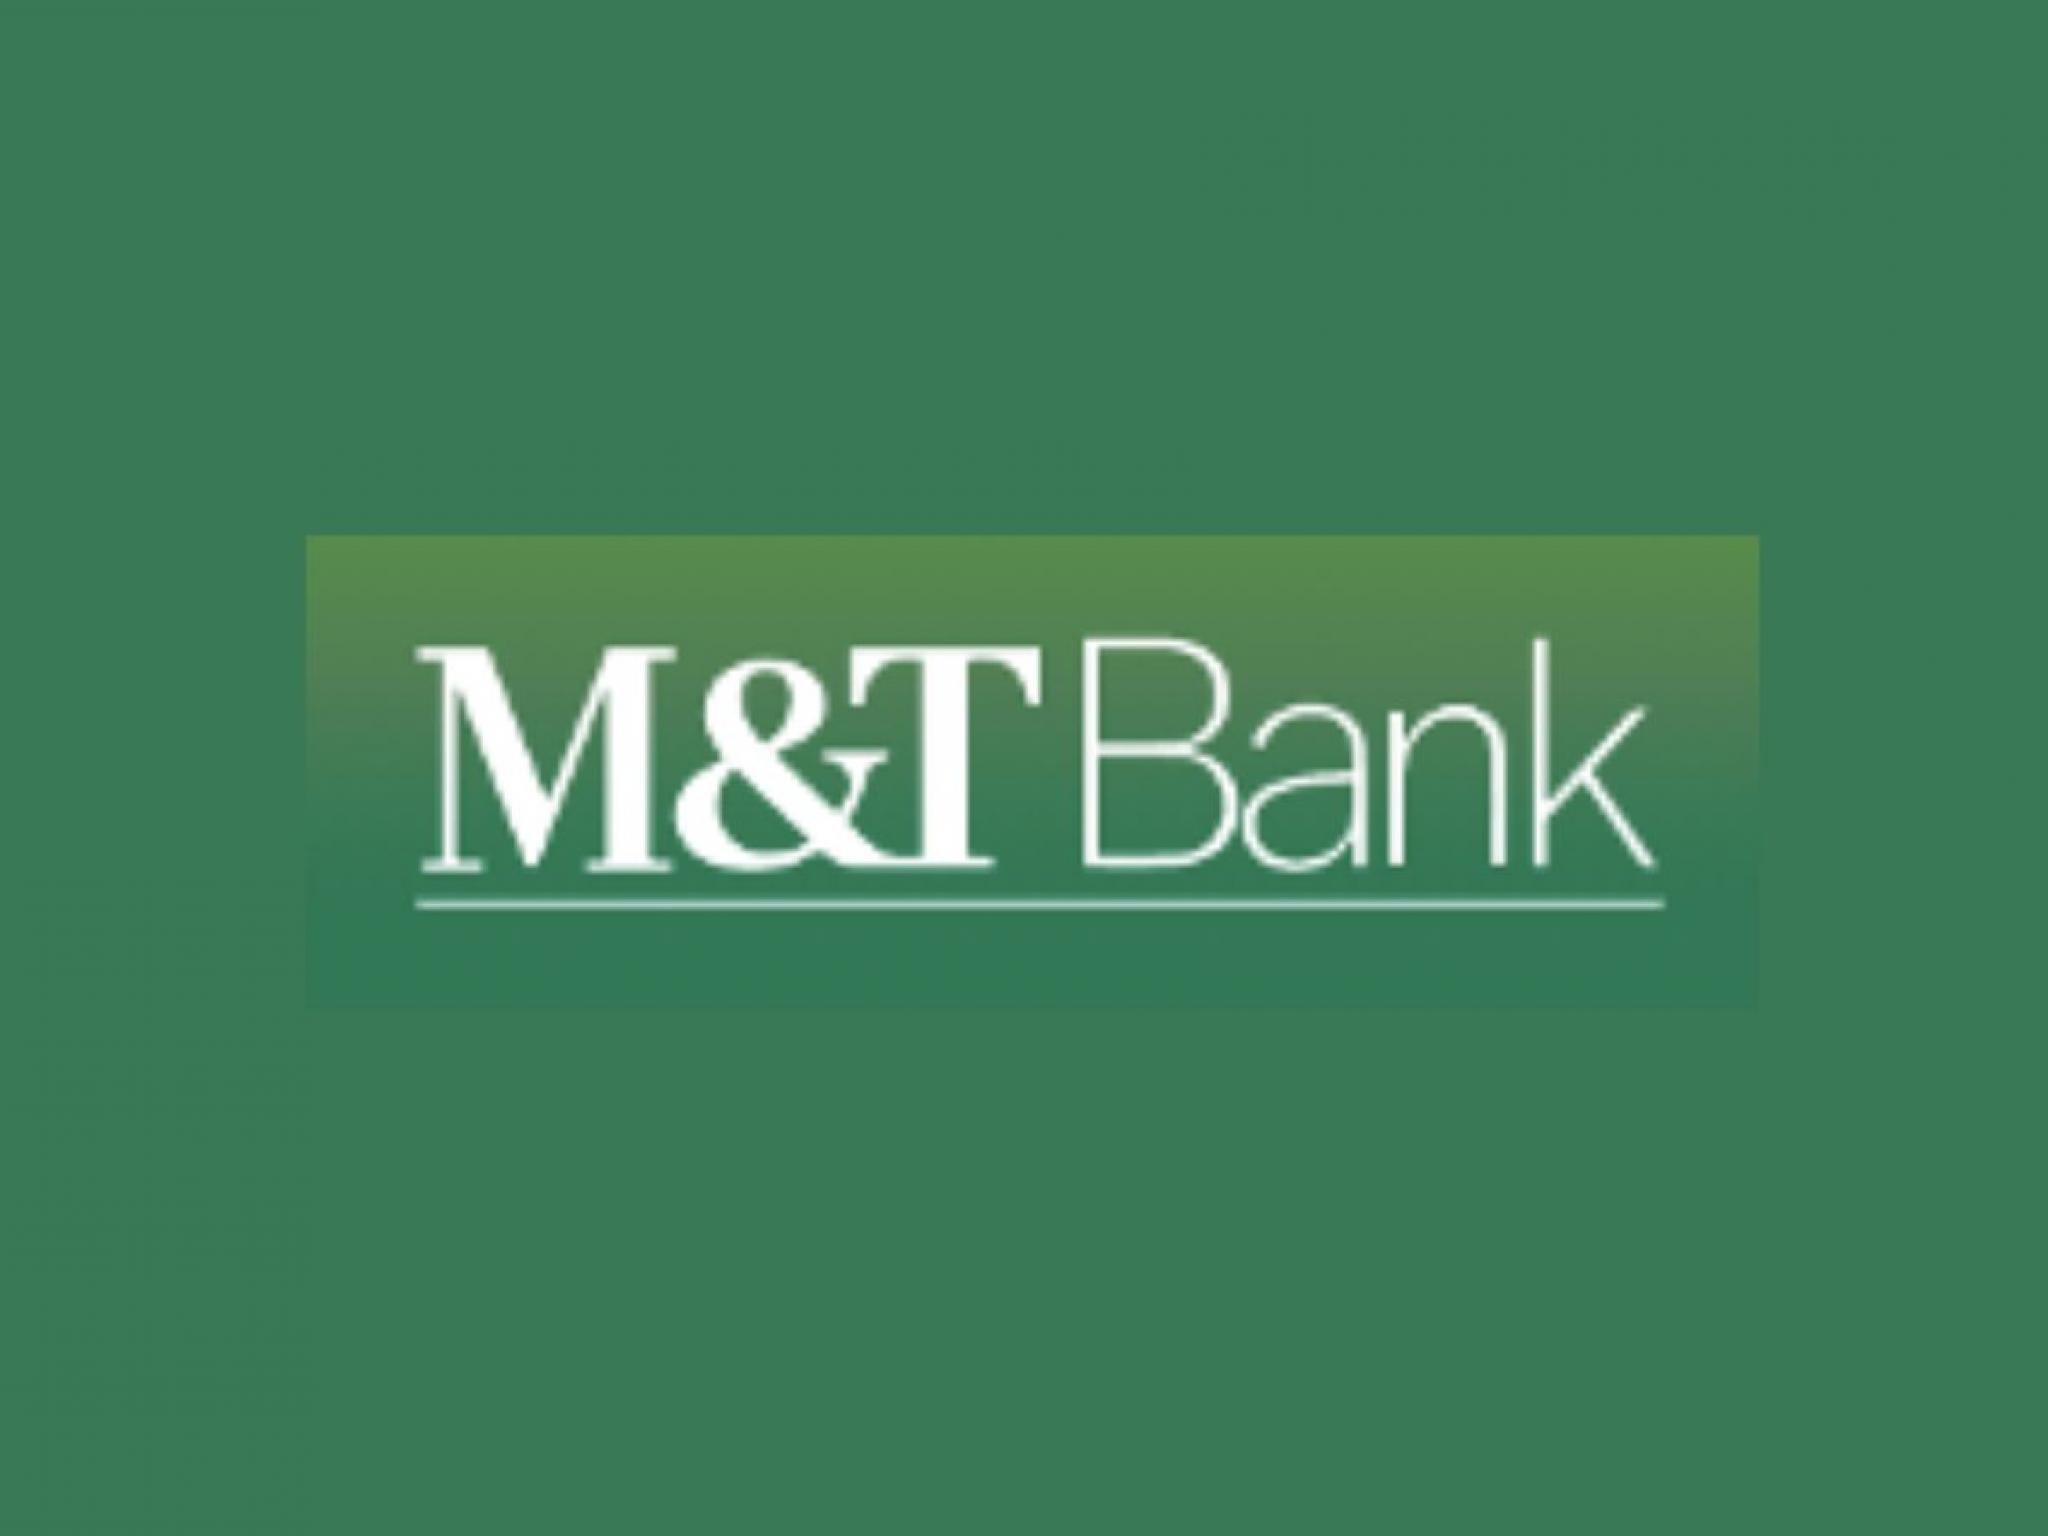  mt-bank-analysts-boost-their-forecasts-after-q1-results 